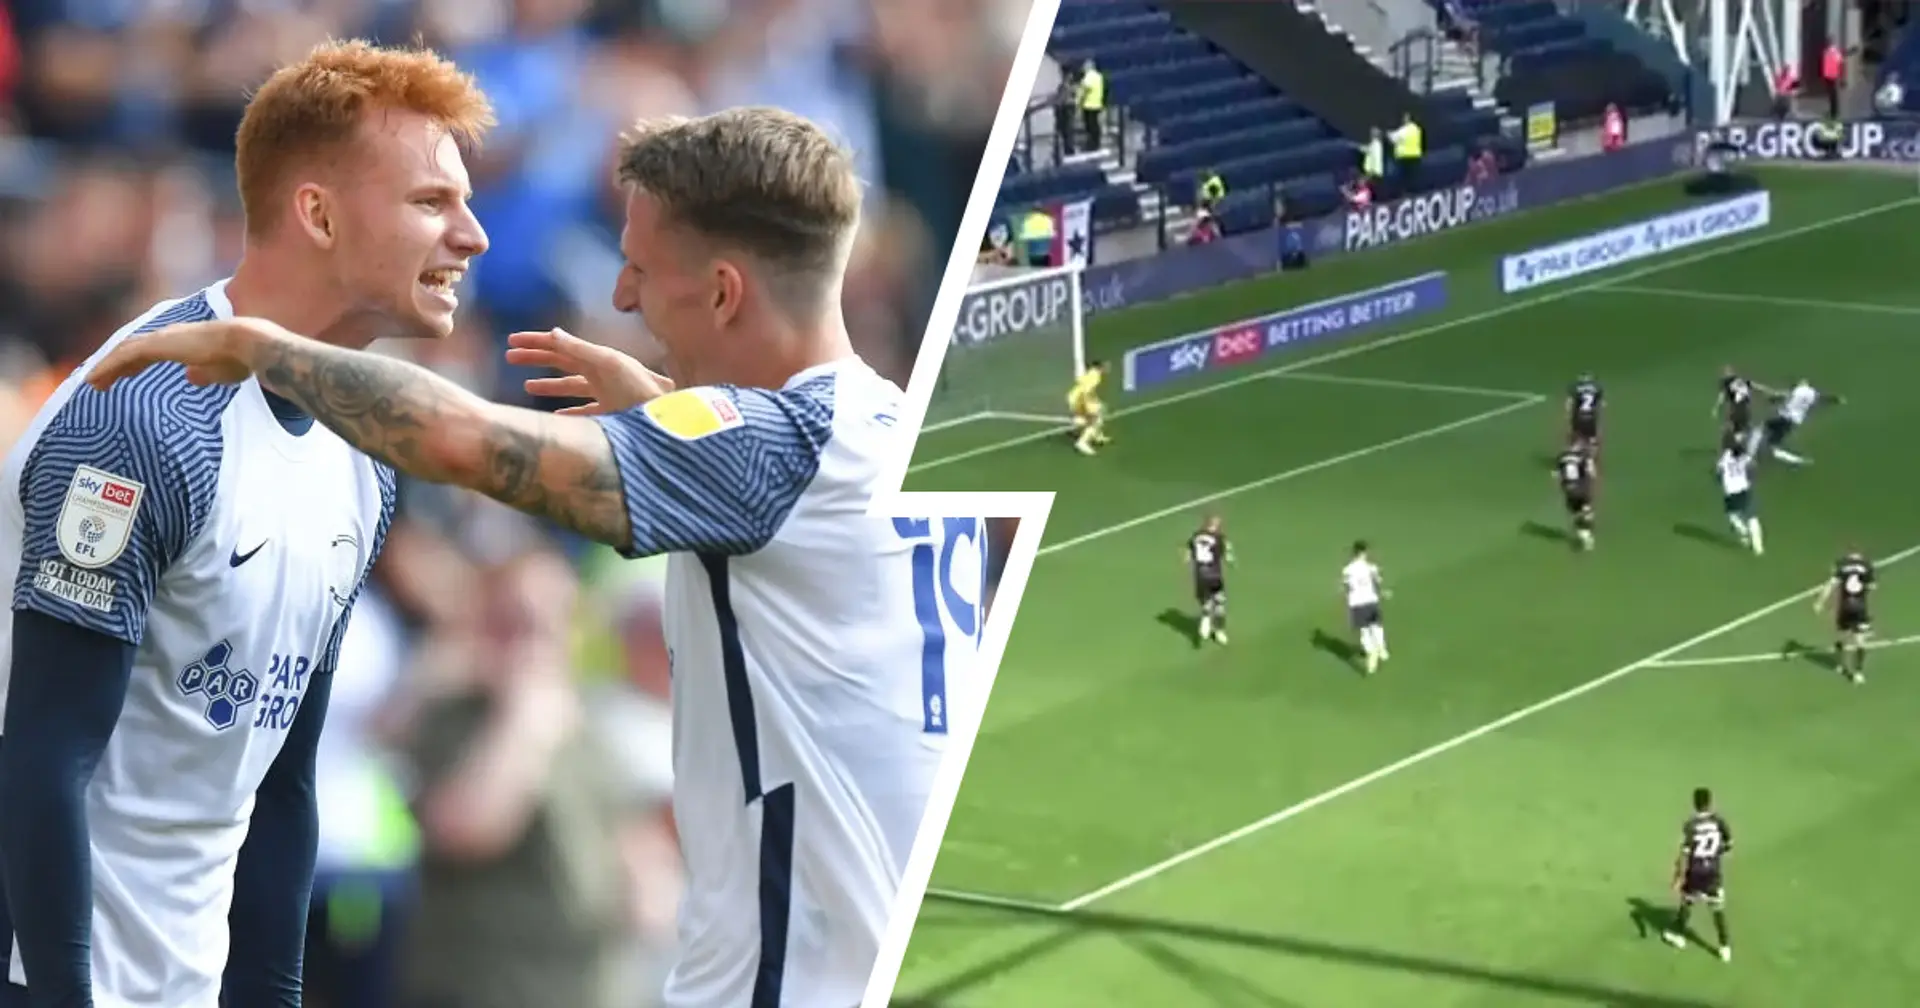 Liverpool loanee Van den Berg makes it into Championship Team of the Week after scoring beauty for Preston (video)